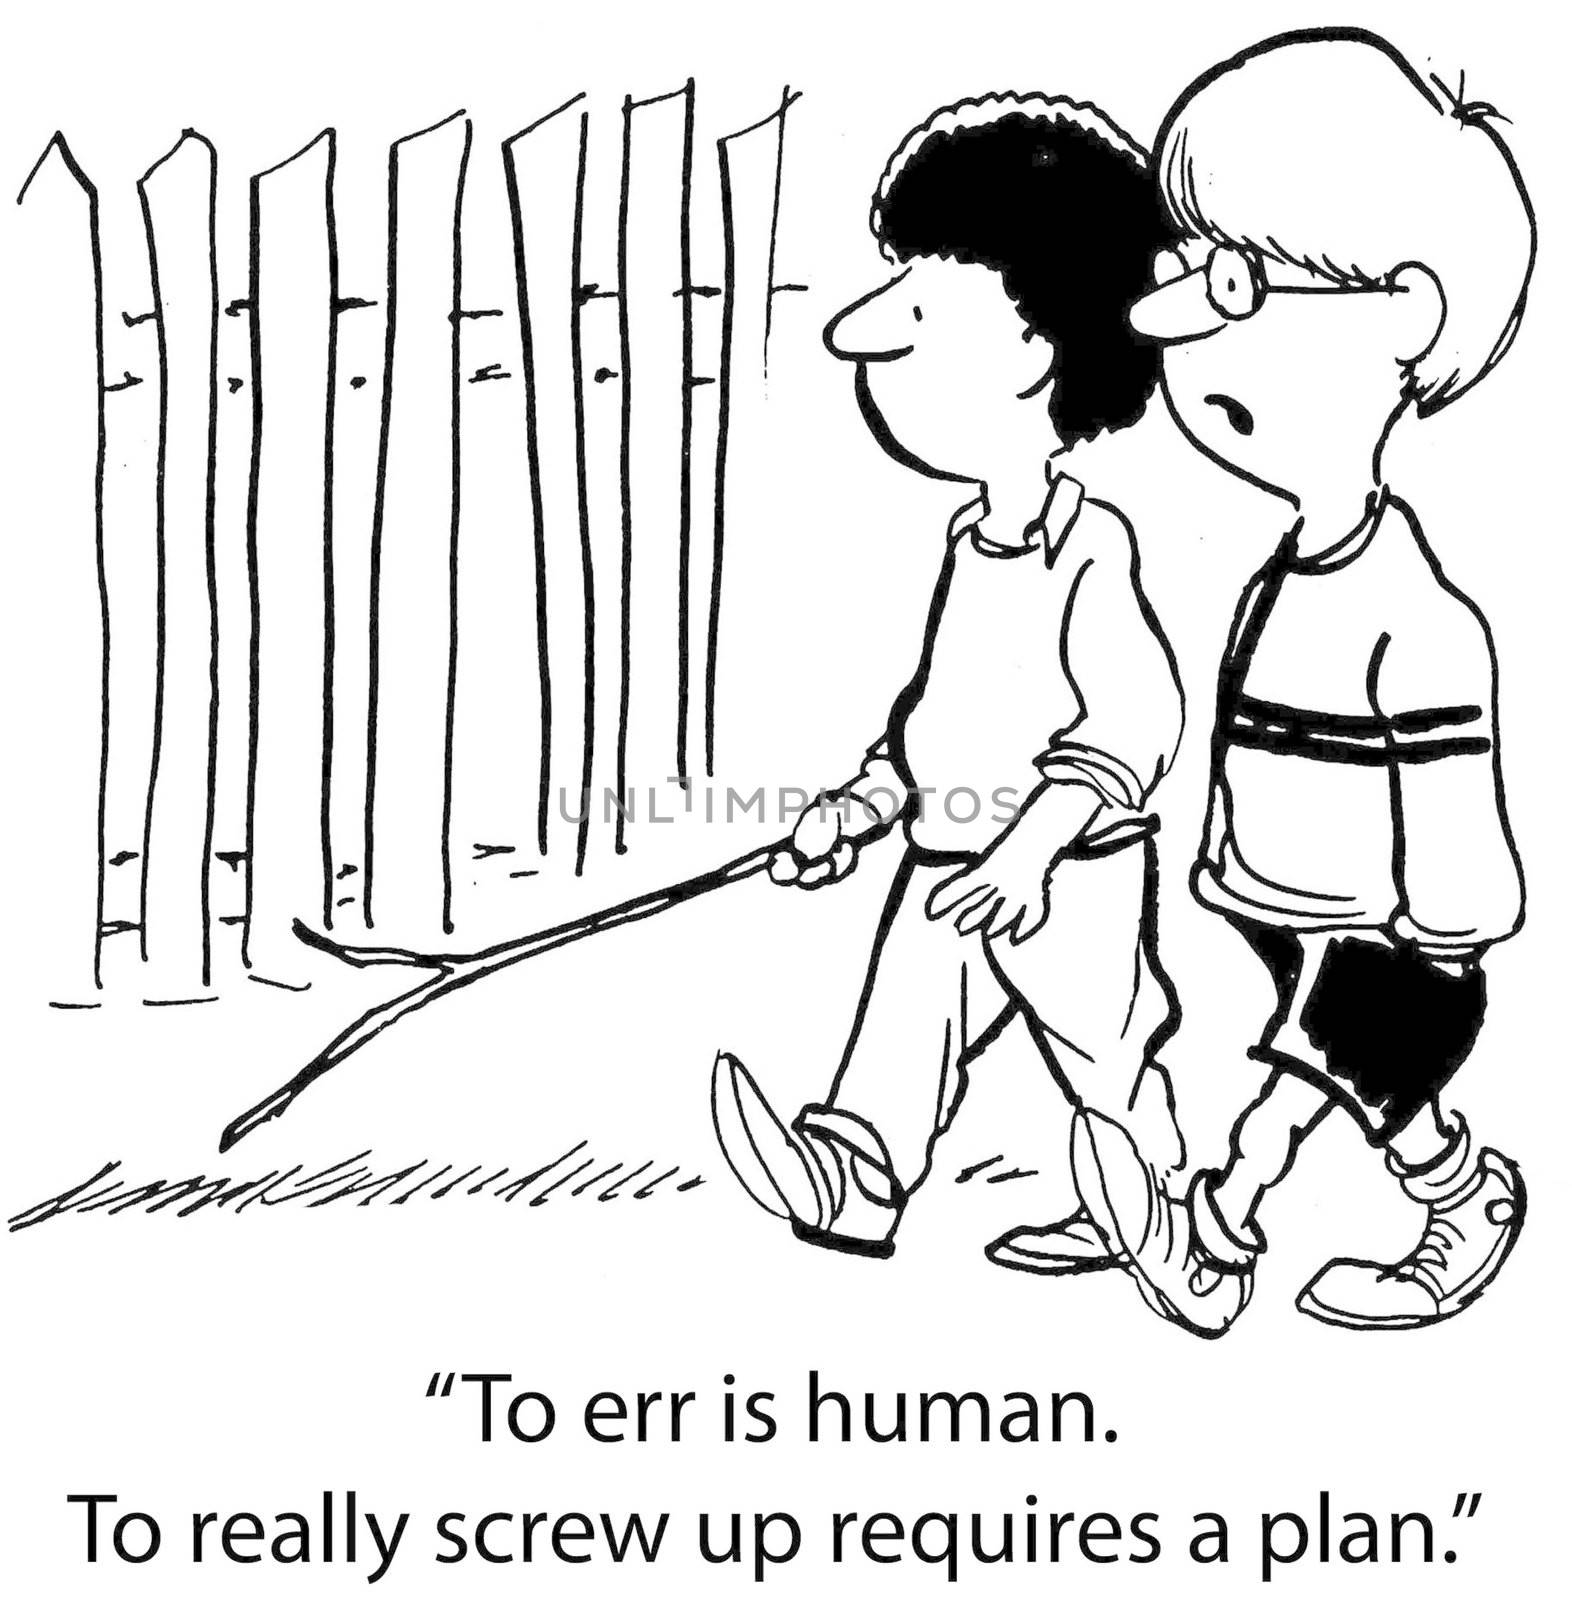 "To err is human. To really screw up requires a plan."